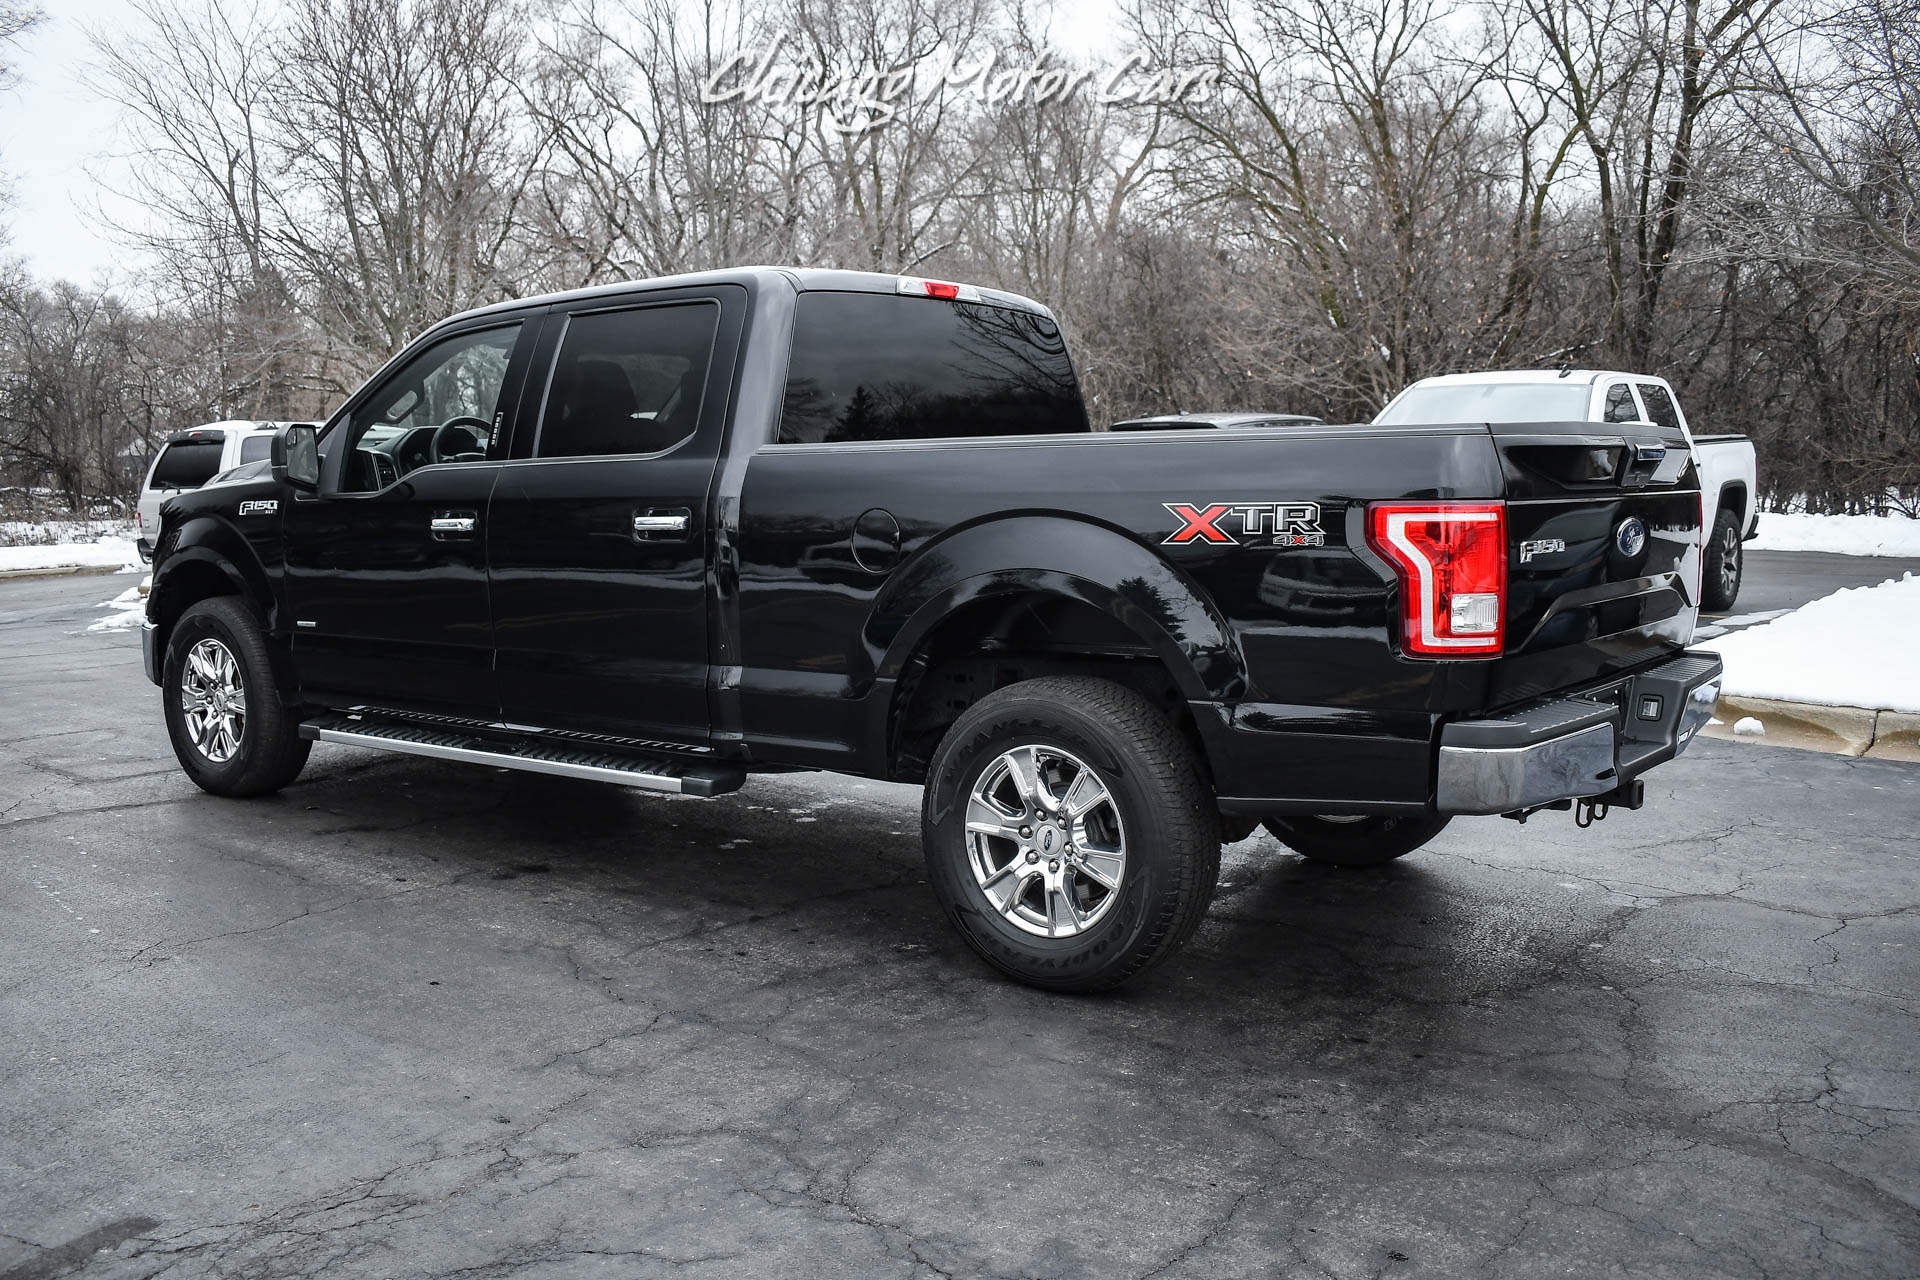 Used 2017 Ford F150 XLT EcoBoost 3.5L SuperCrew Cab Pickup F150 4x4 For